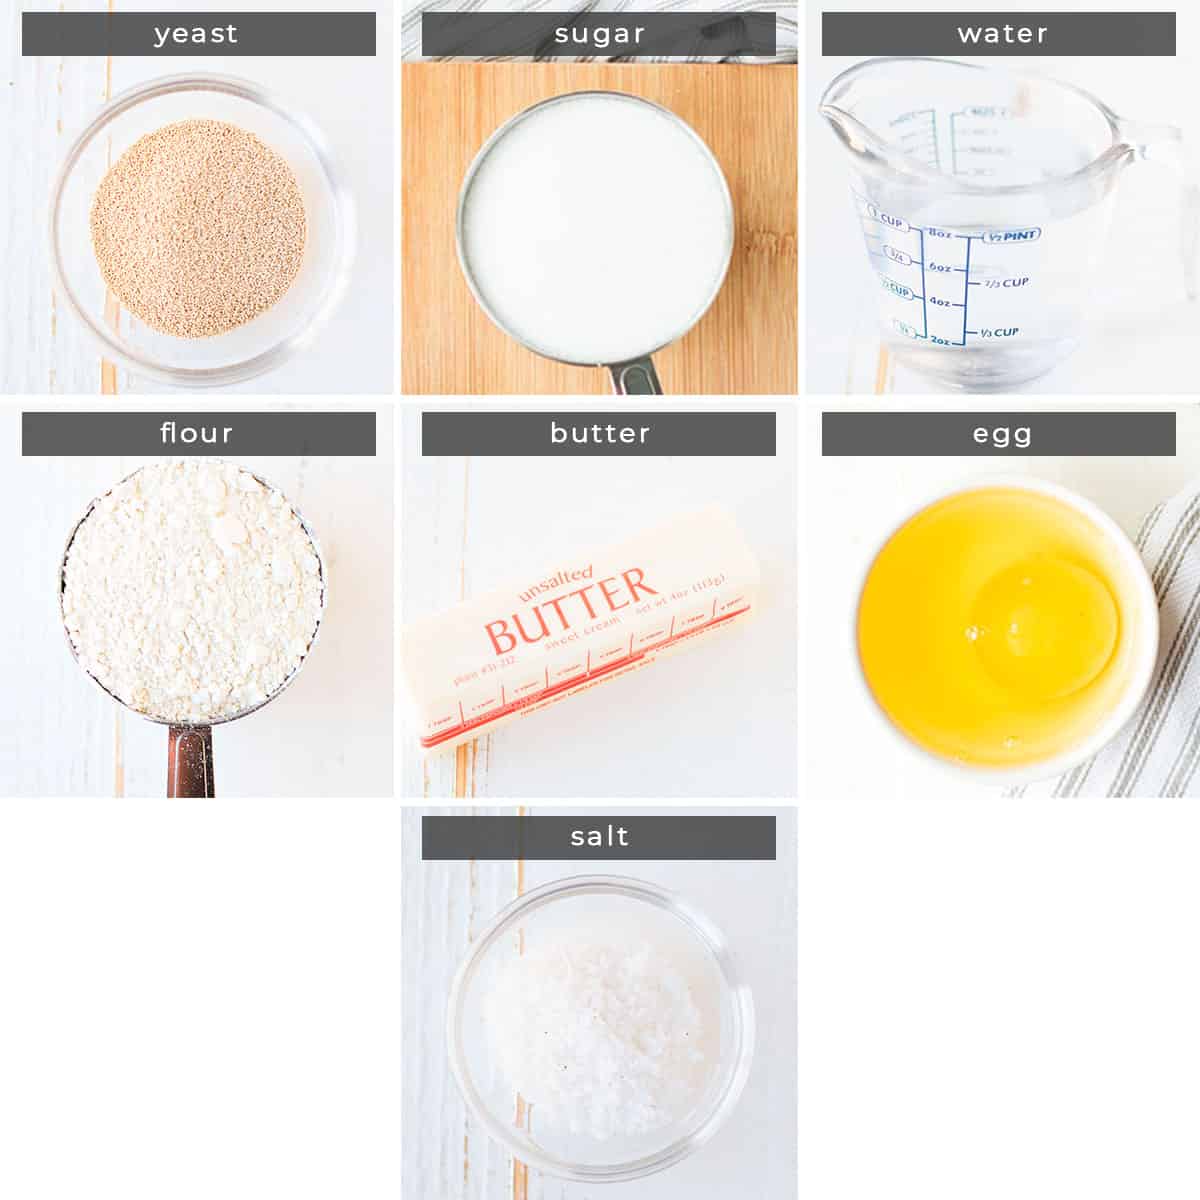 Image containing recipe ingredients yeast, sugar, water, flour, butter, egg, and salt.